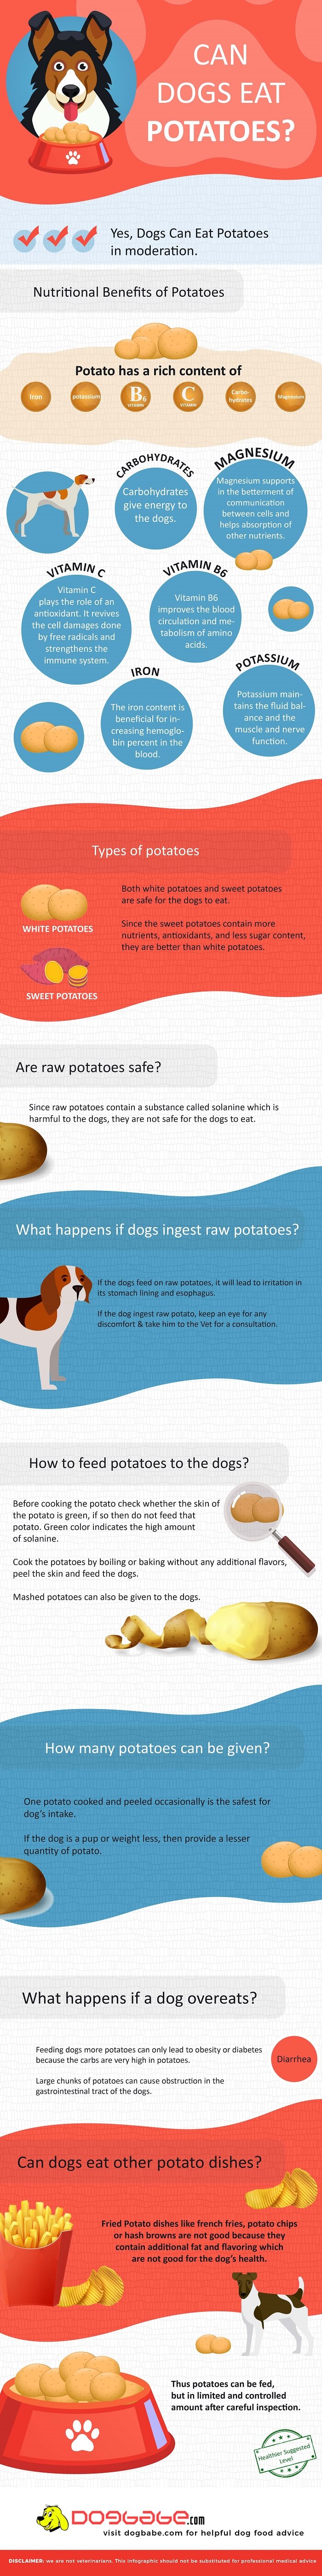 can dogs eat potatoes infographic